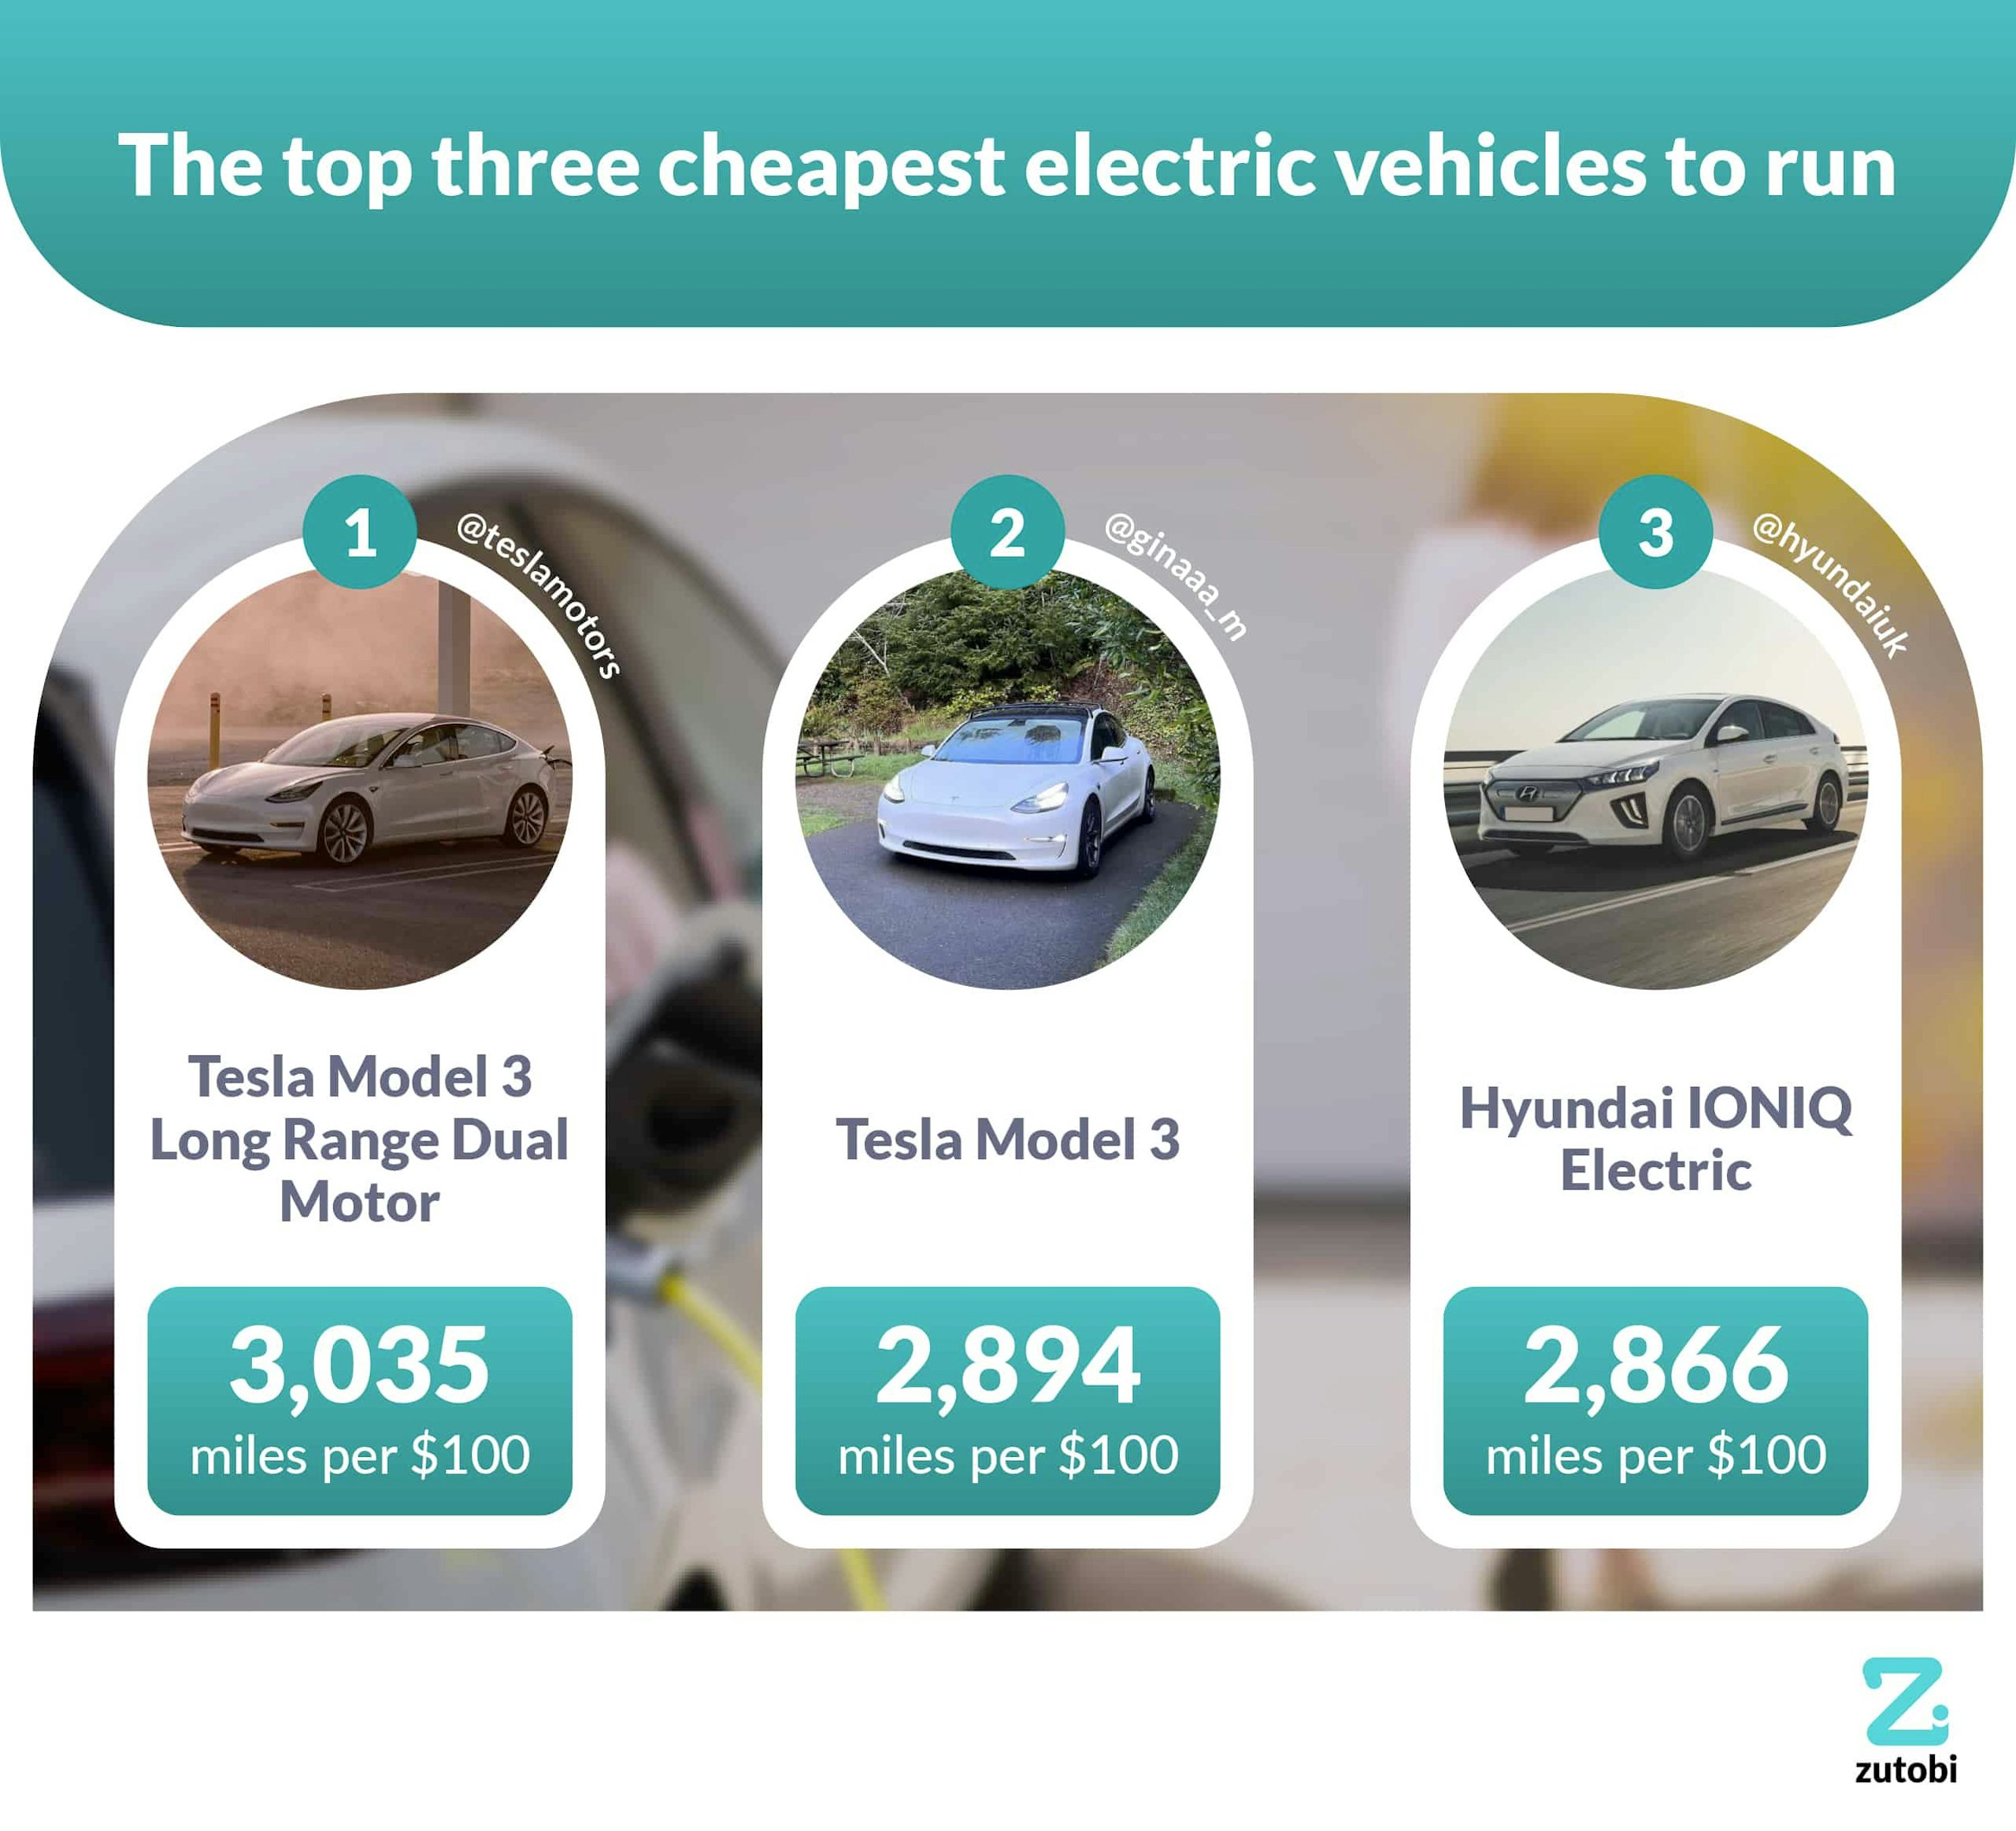 Cheapest Electric Cars for 2023